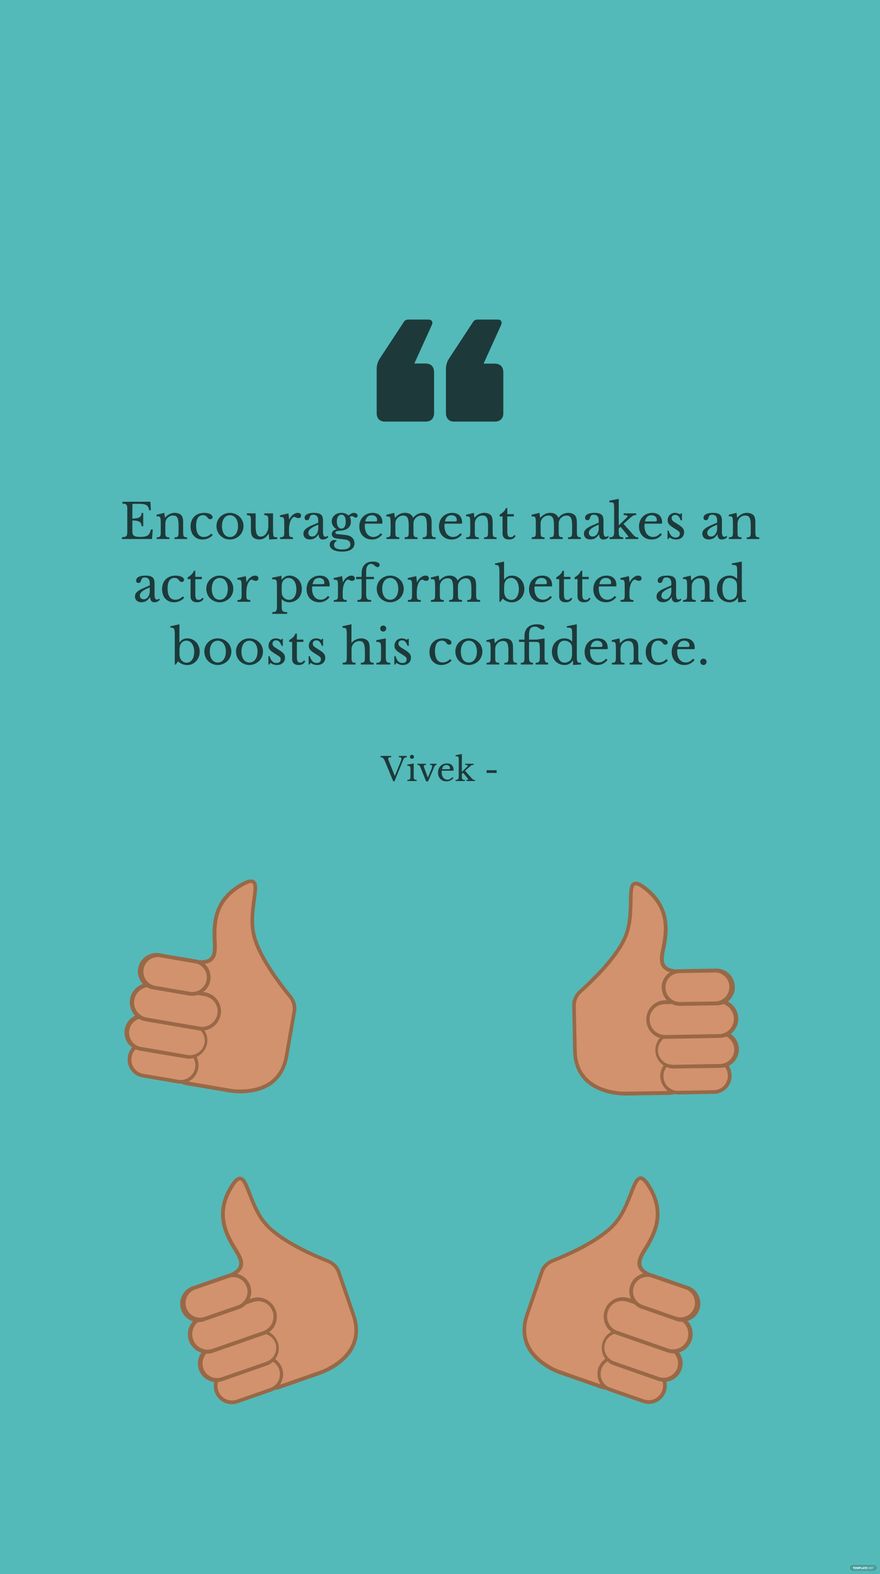 Vivek - Encouragement makes an actor perform better and boosts his confidence. in JPG